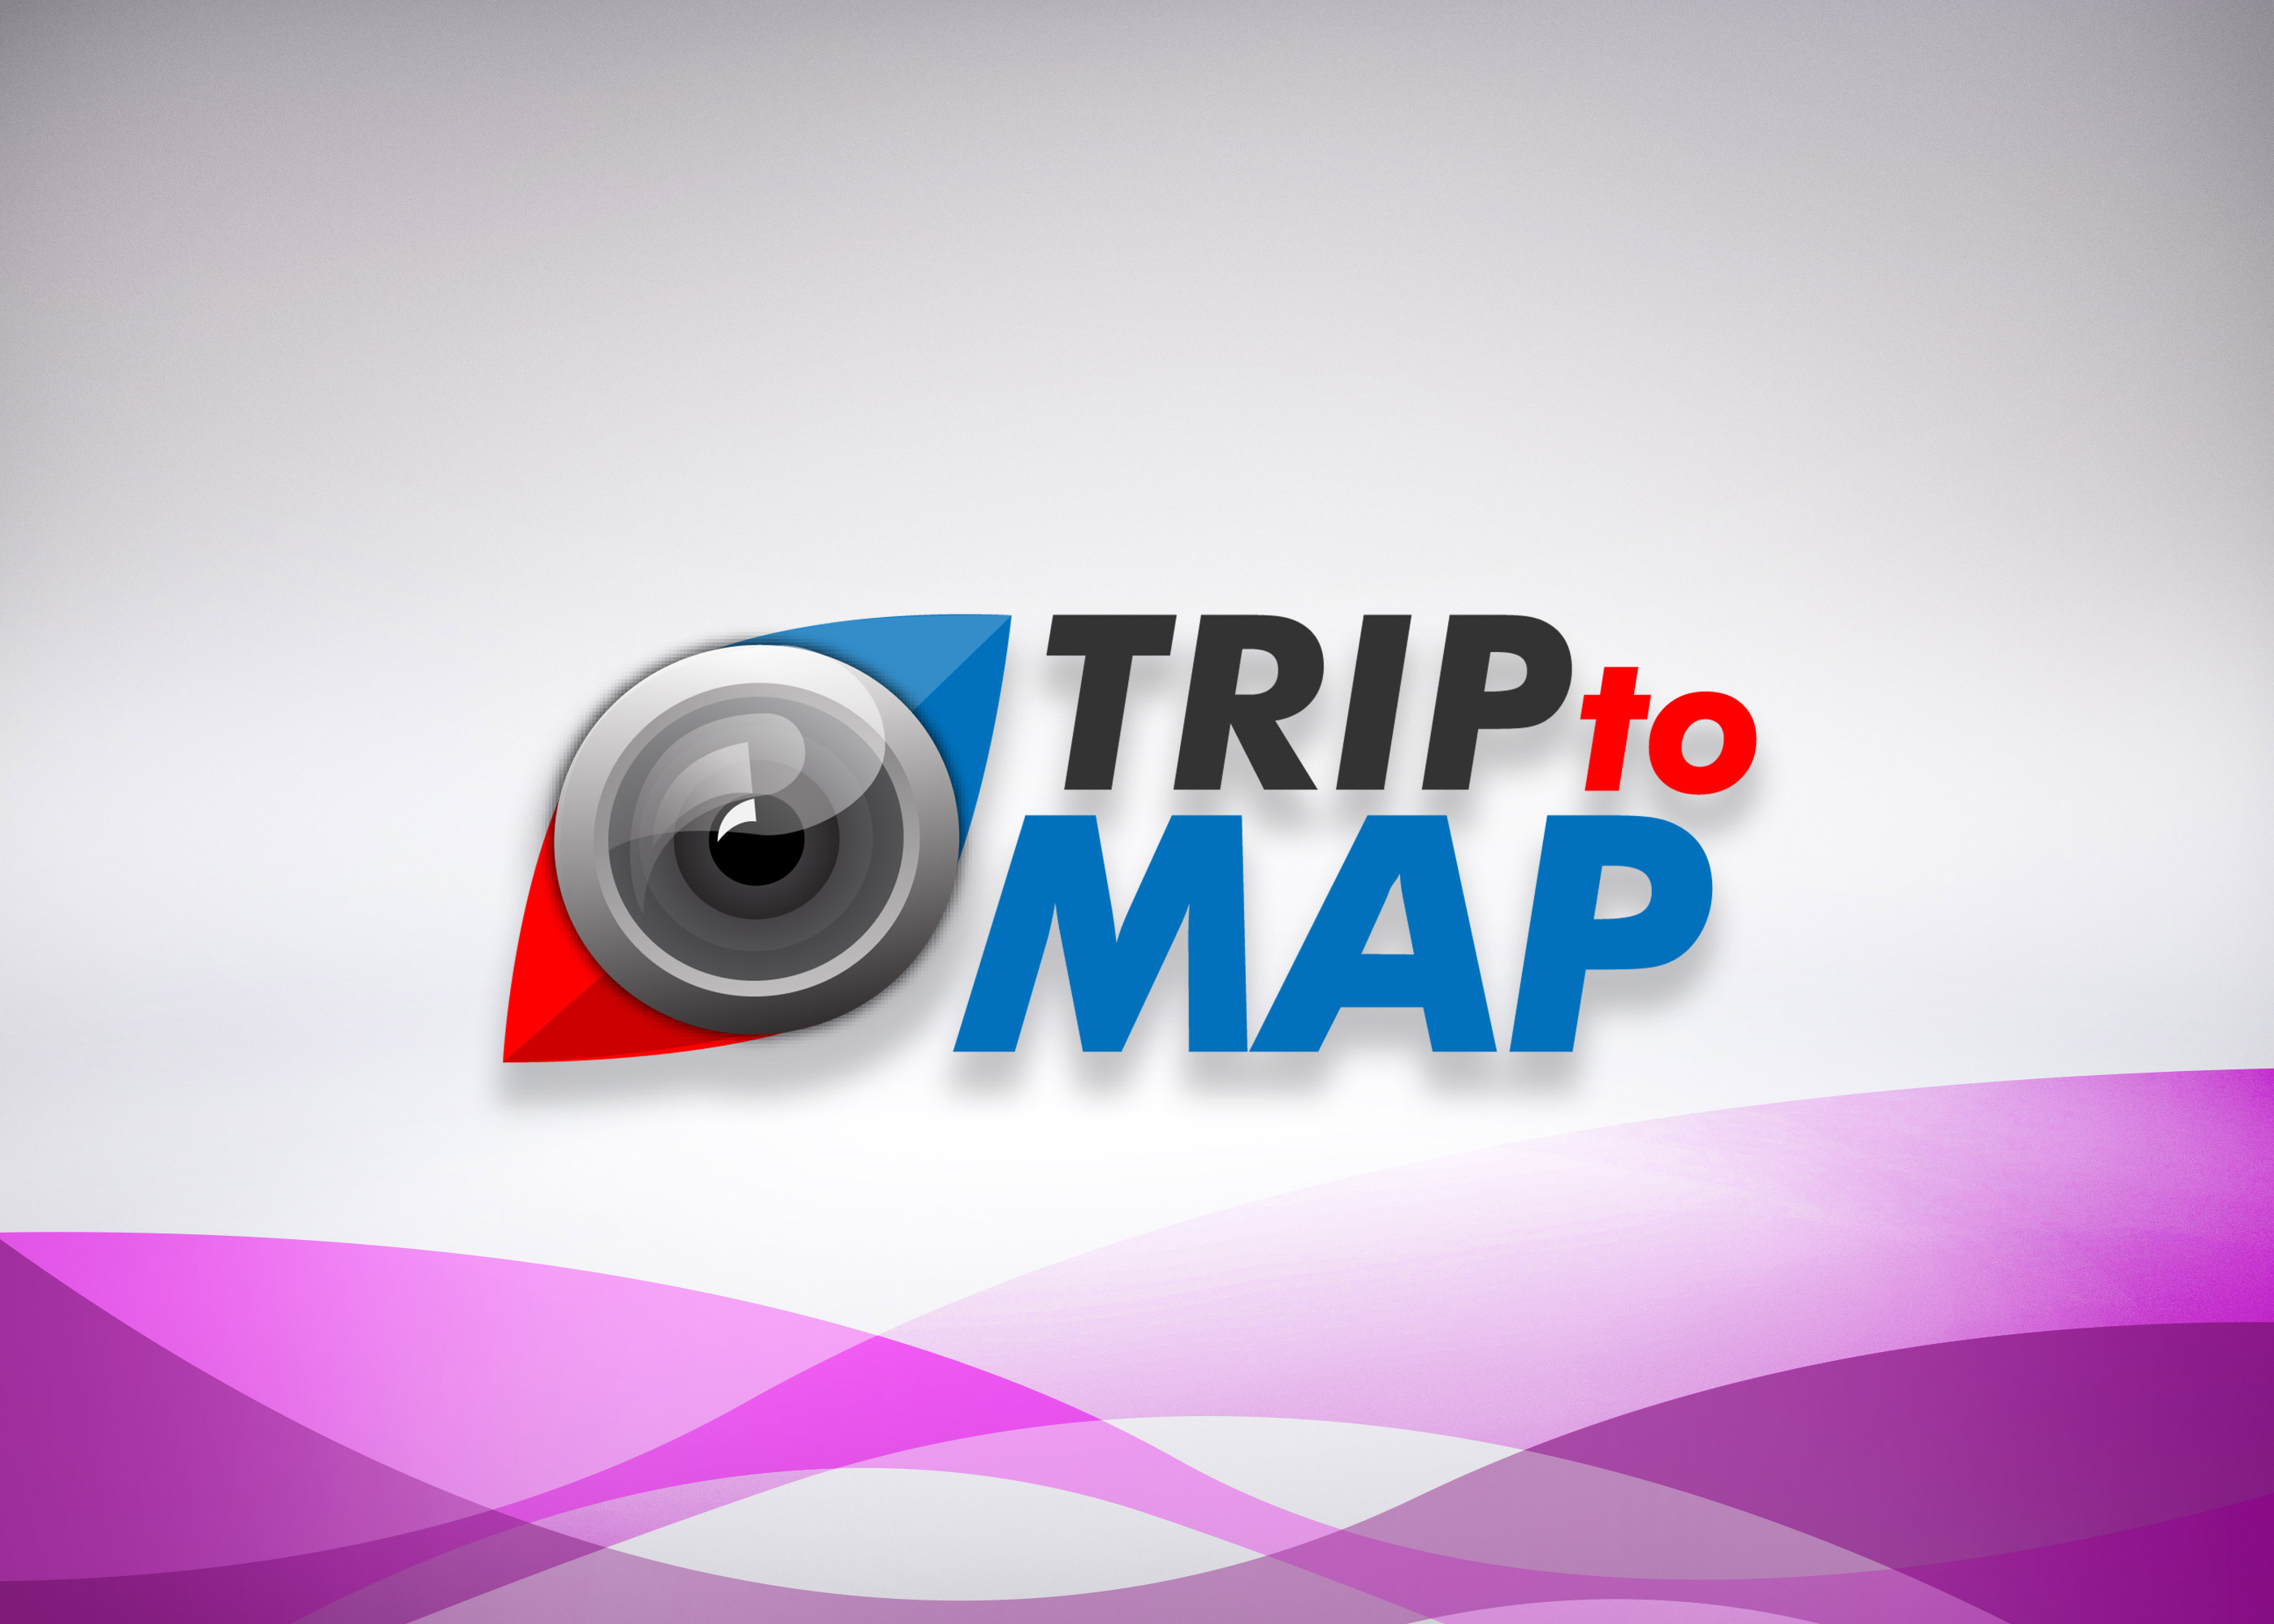 Trip to map